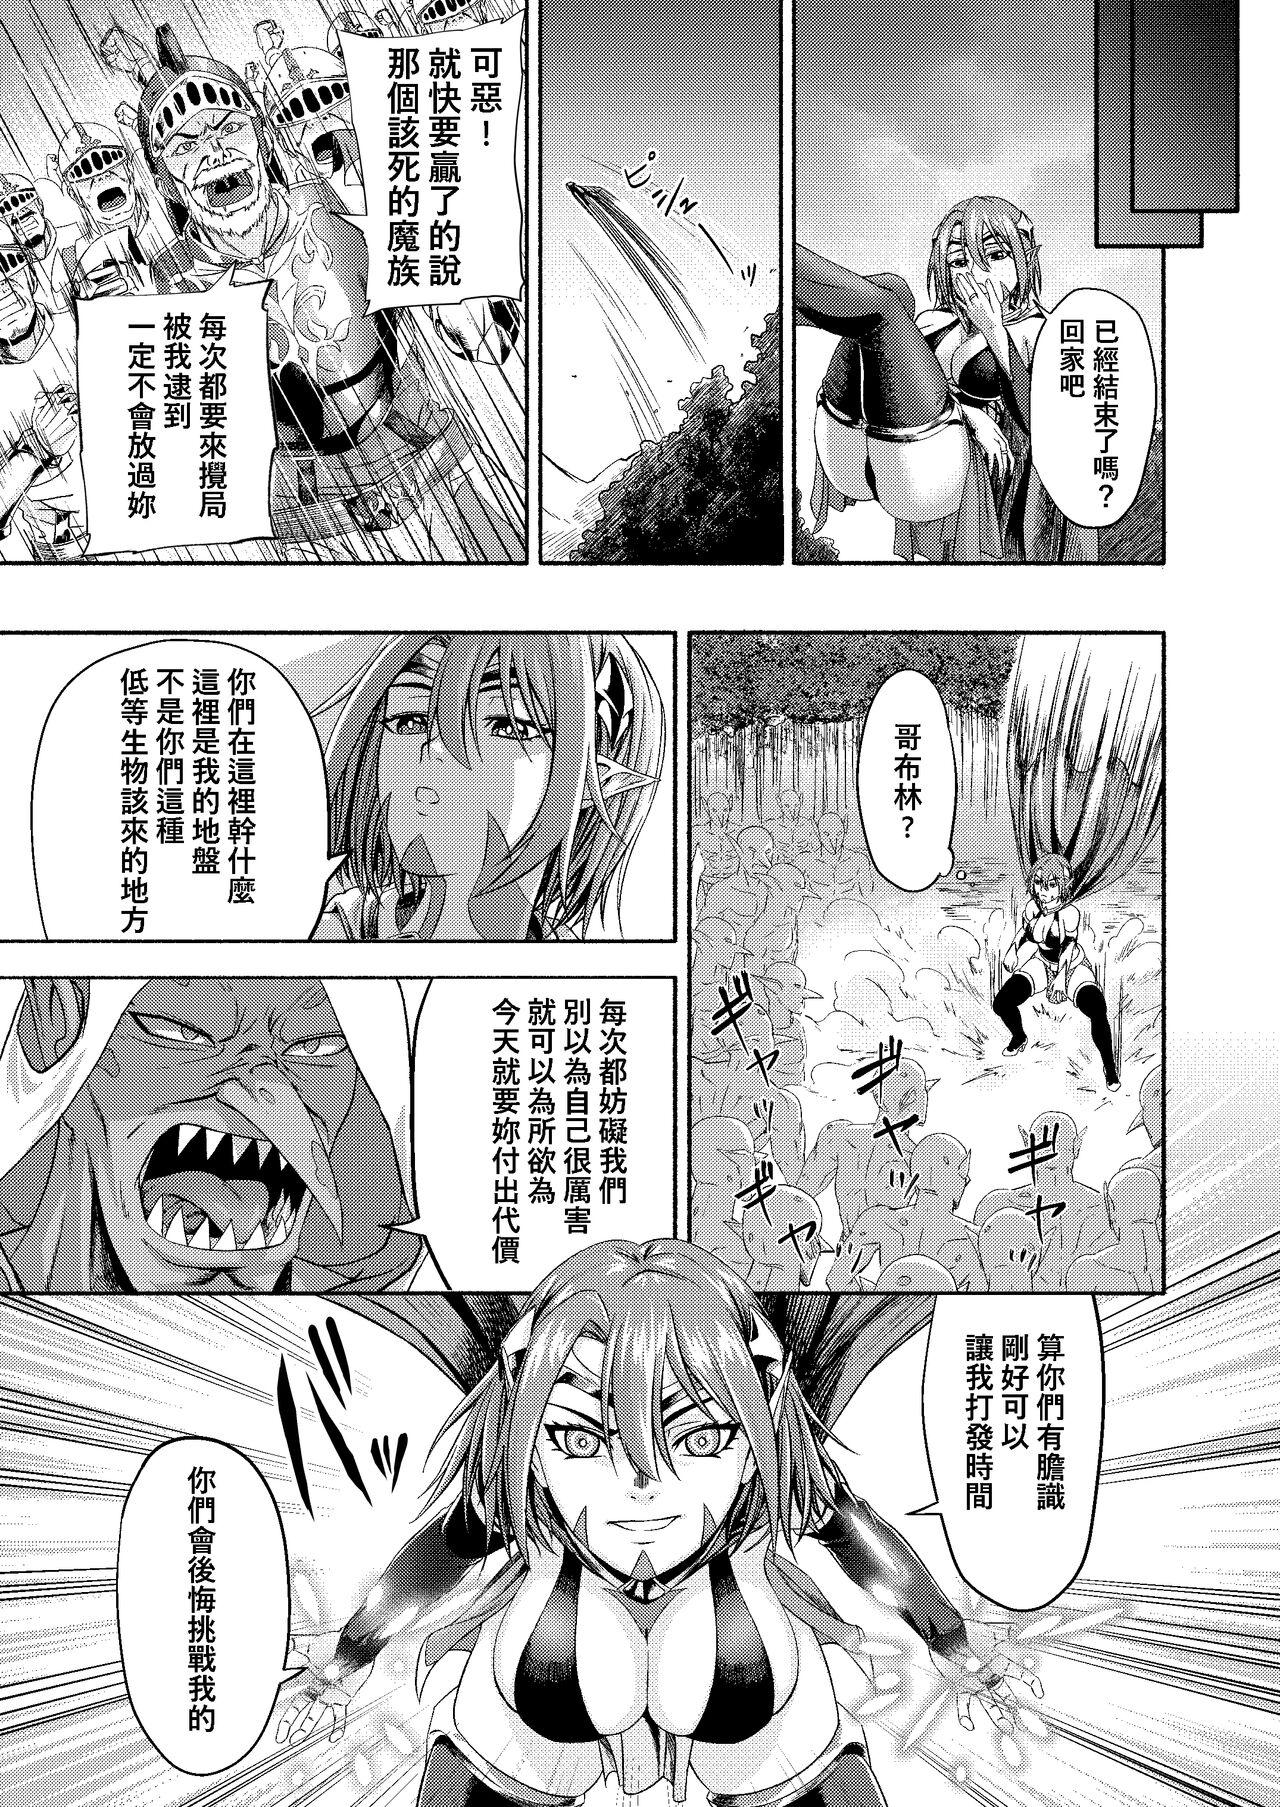 Gostosa Millennium Livestock-Candidate Demon King falls on Goblin Onaho Squirters - Page 5